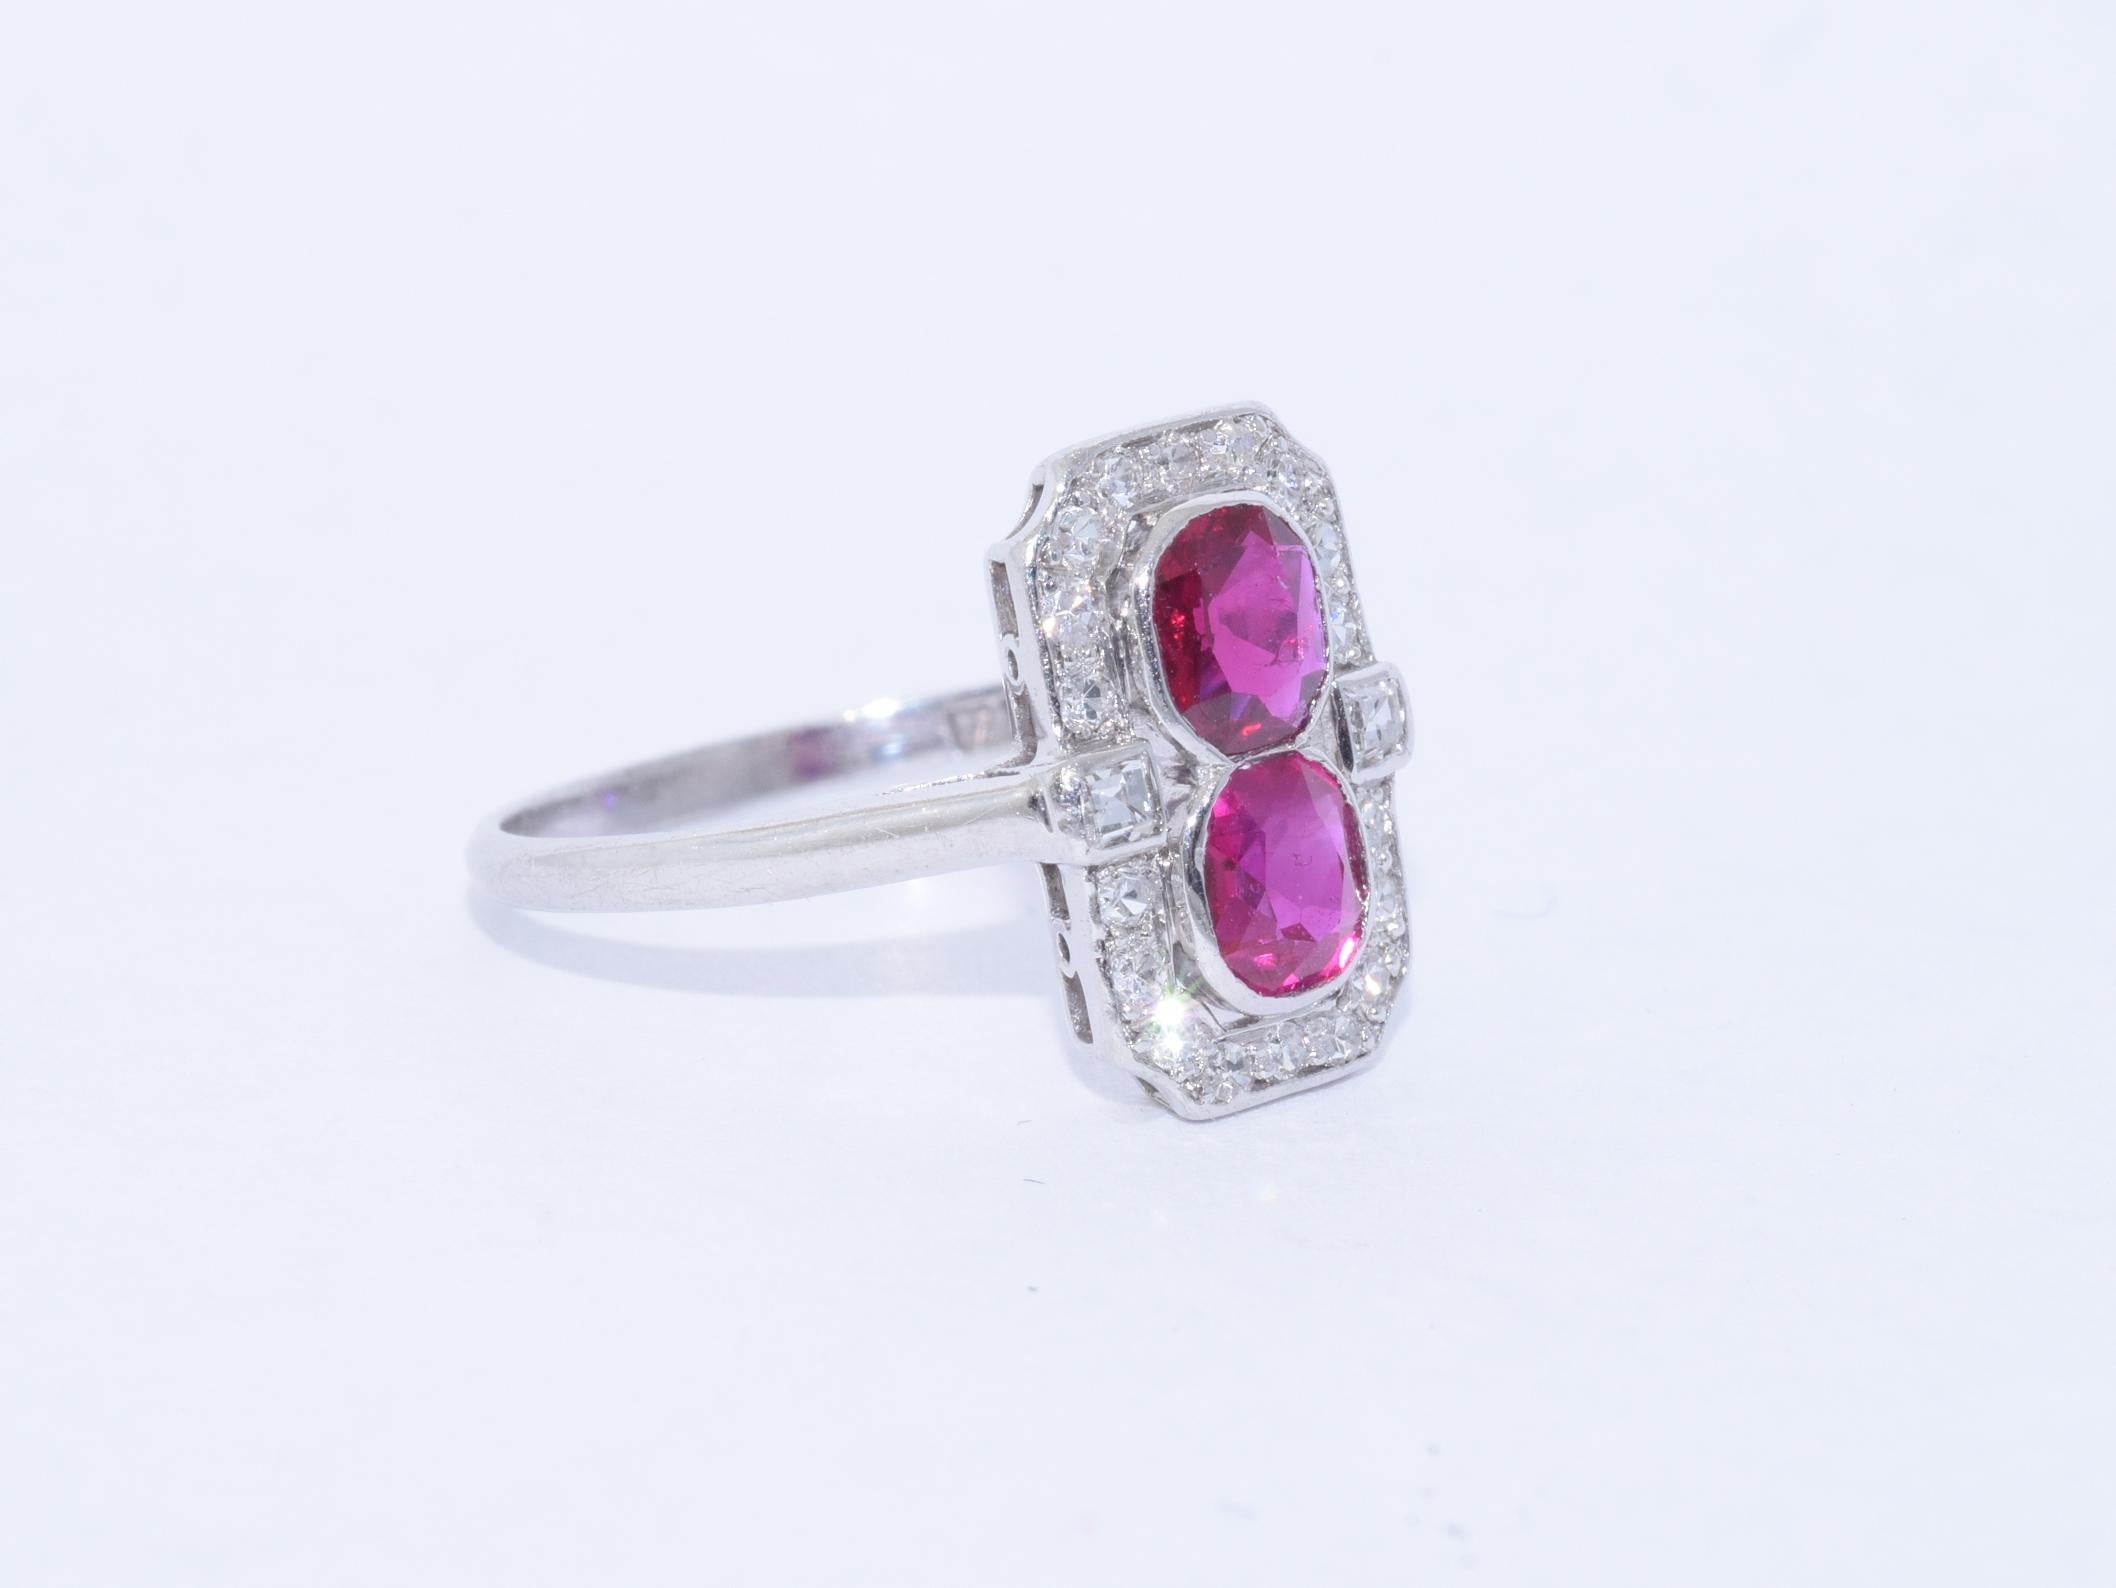 Twin cushion rubies totaling approximately 1 carat are accented with single cut and square diamonds totaling approximately 0.50 carat mounted in platinum. The top of the ring measures approximately 0.54 x 0.39 inches and is currently a size 6.5.